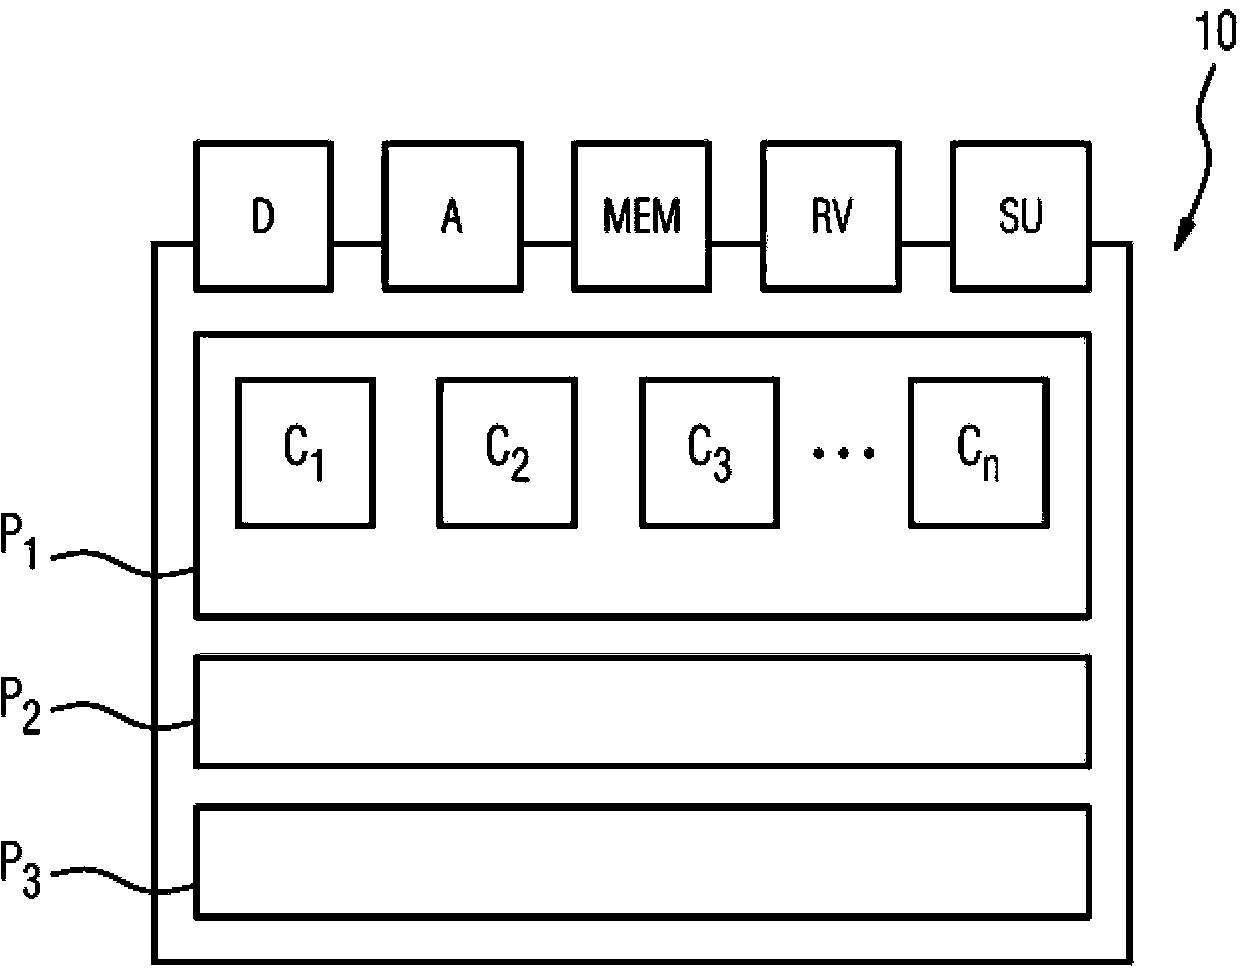 Volume rendering on shared memory systems with multiple processors by optimizing cache reuse